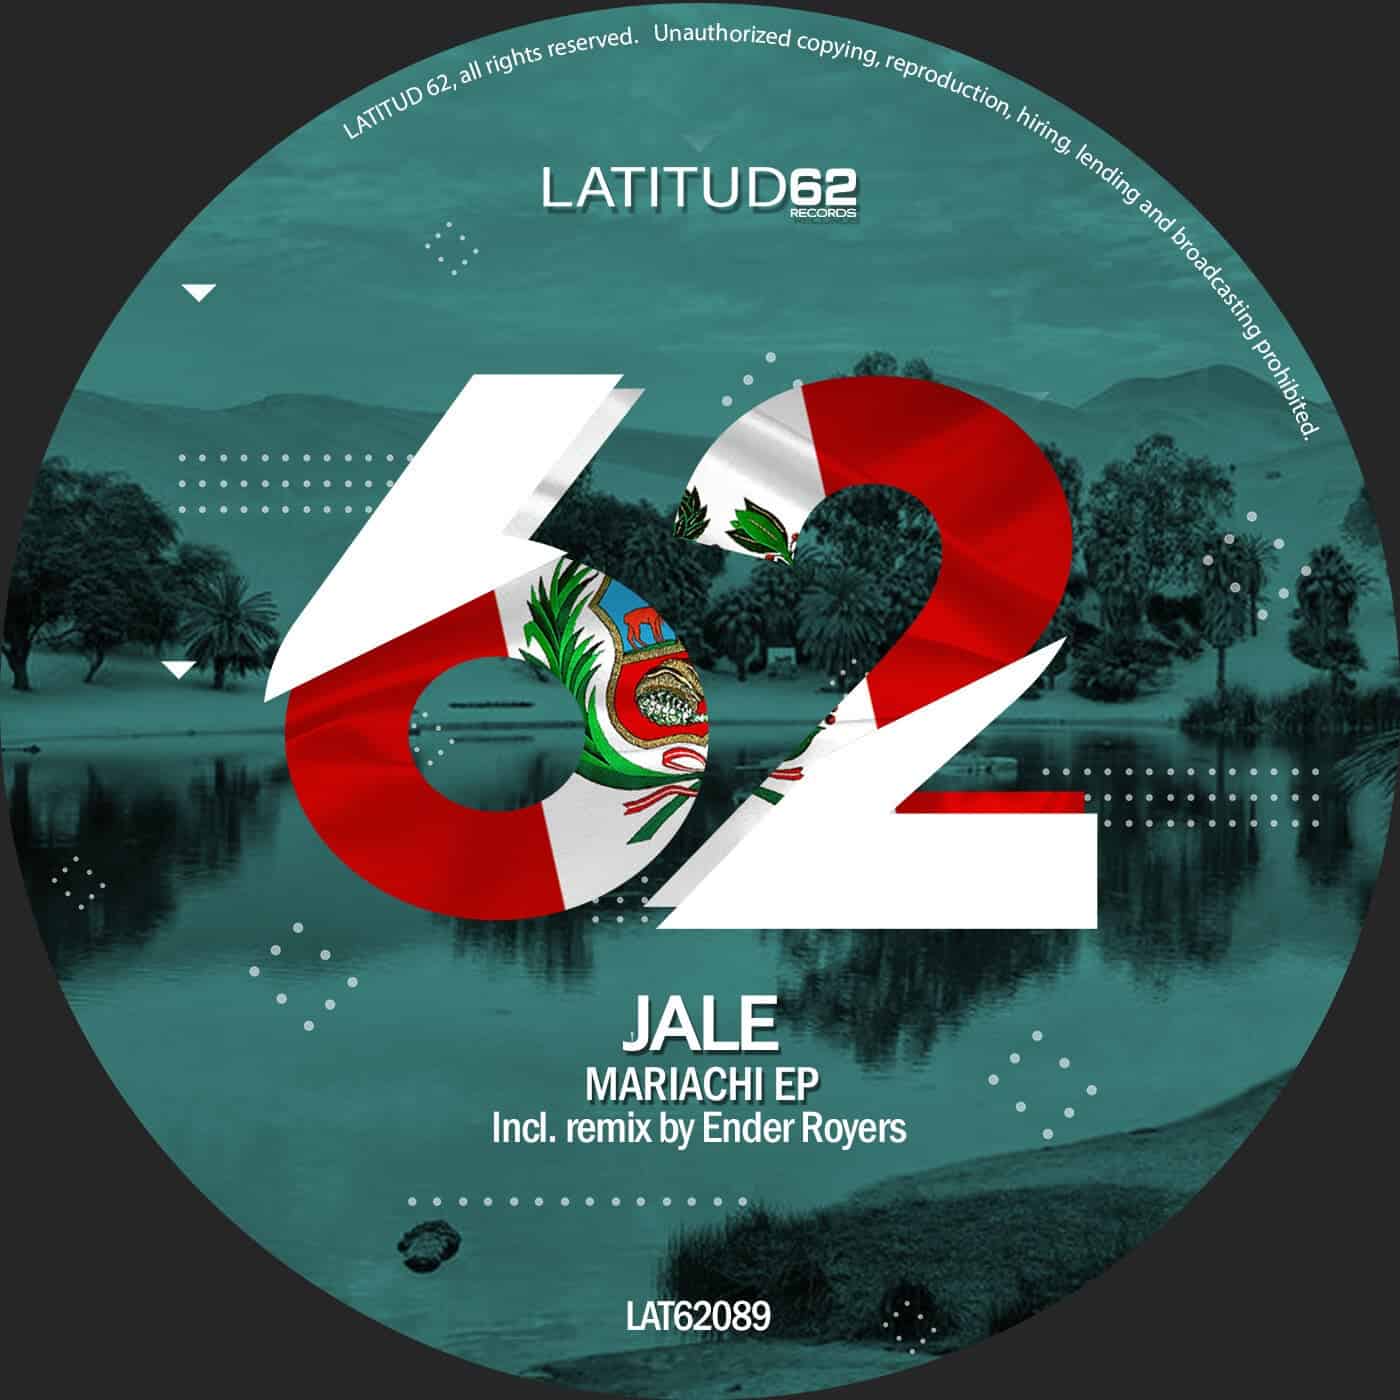 image cover: Jale - Mariachi EP / LAT62089